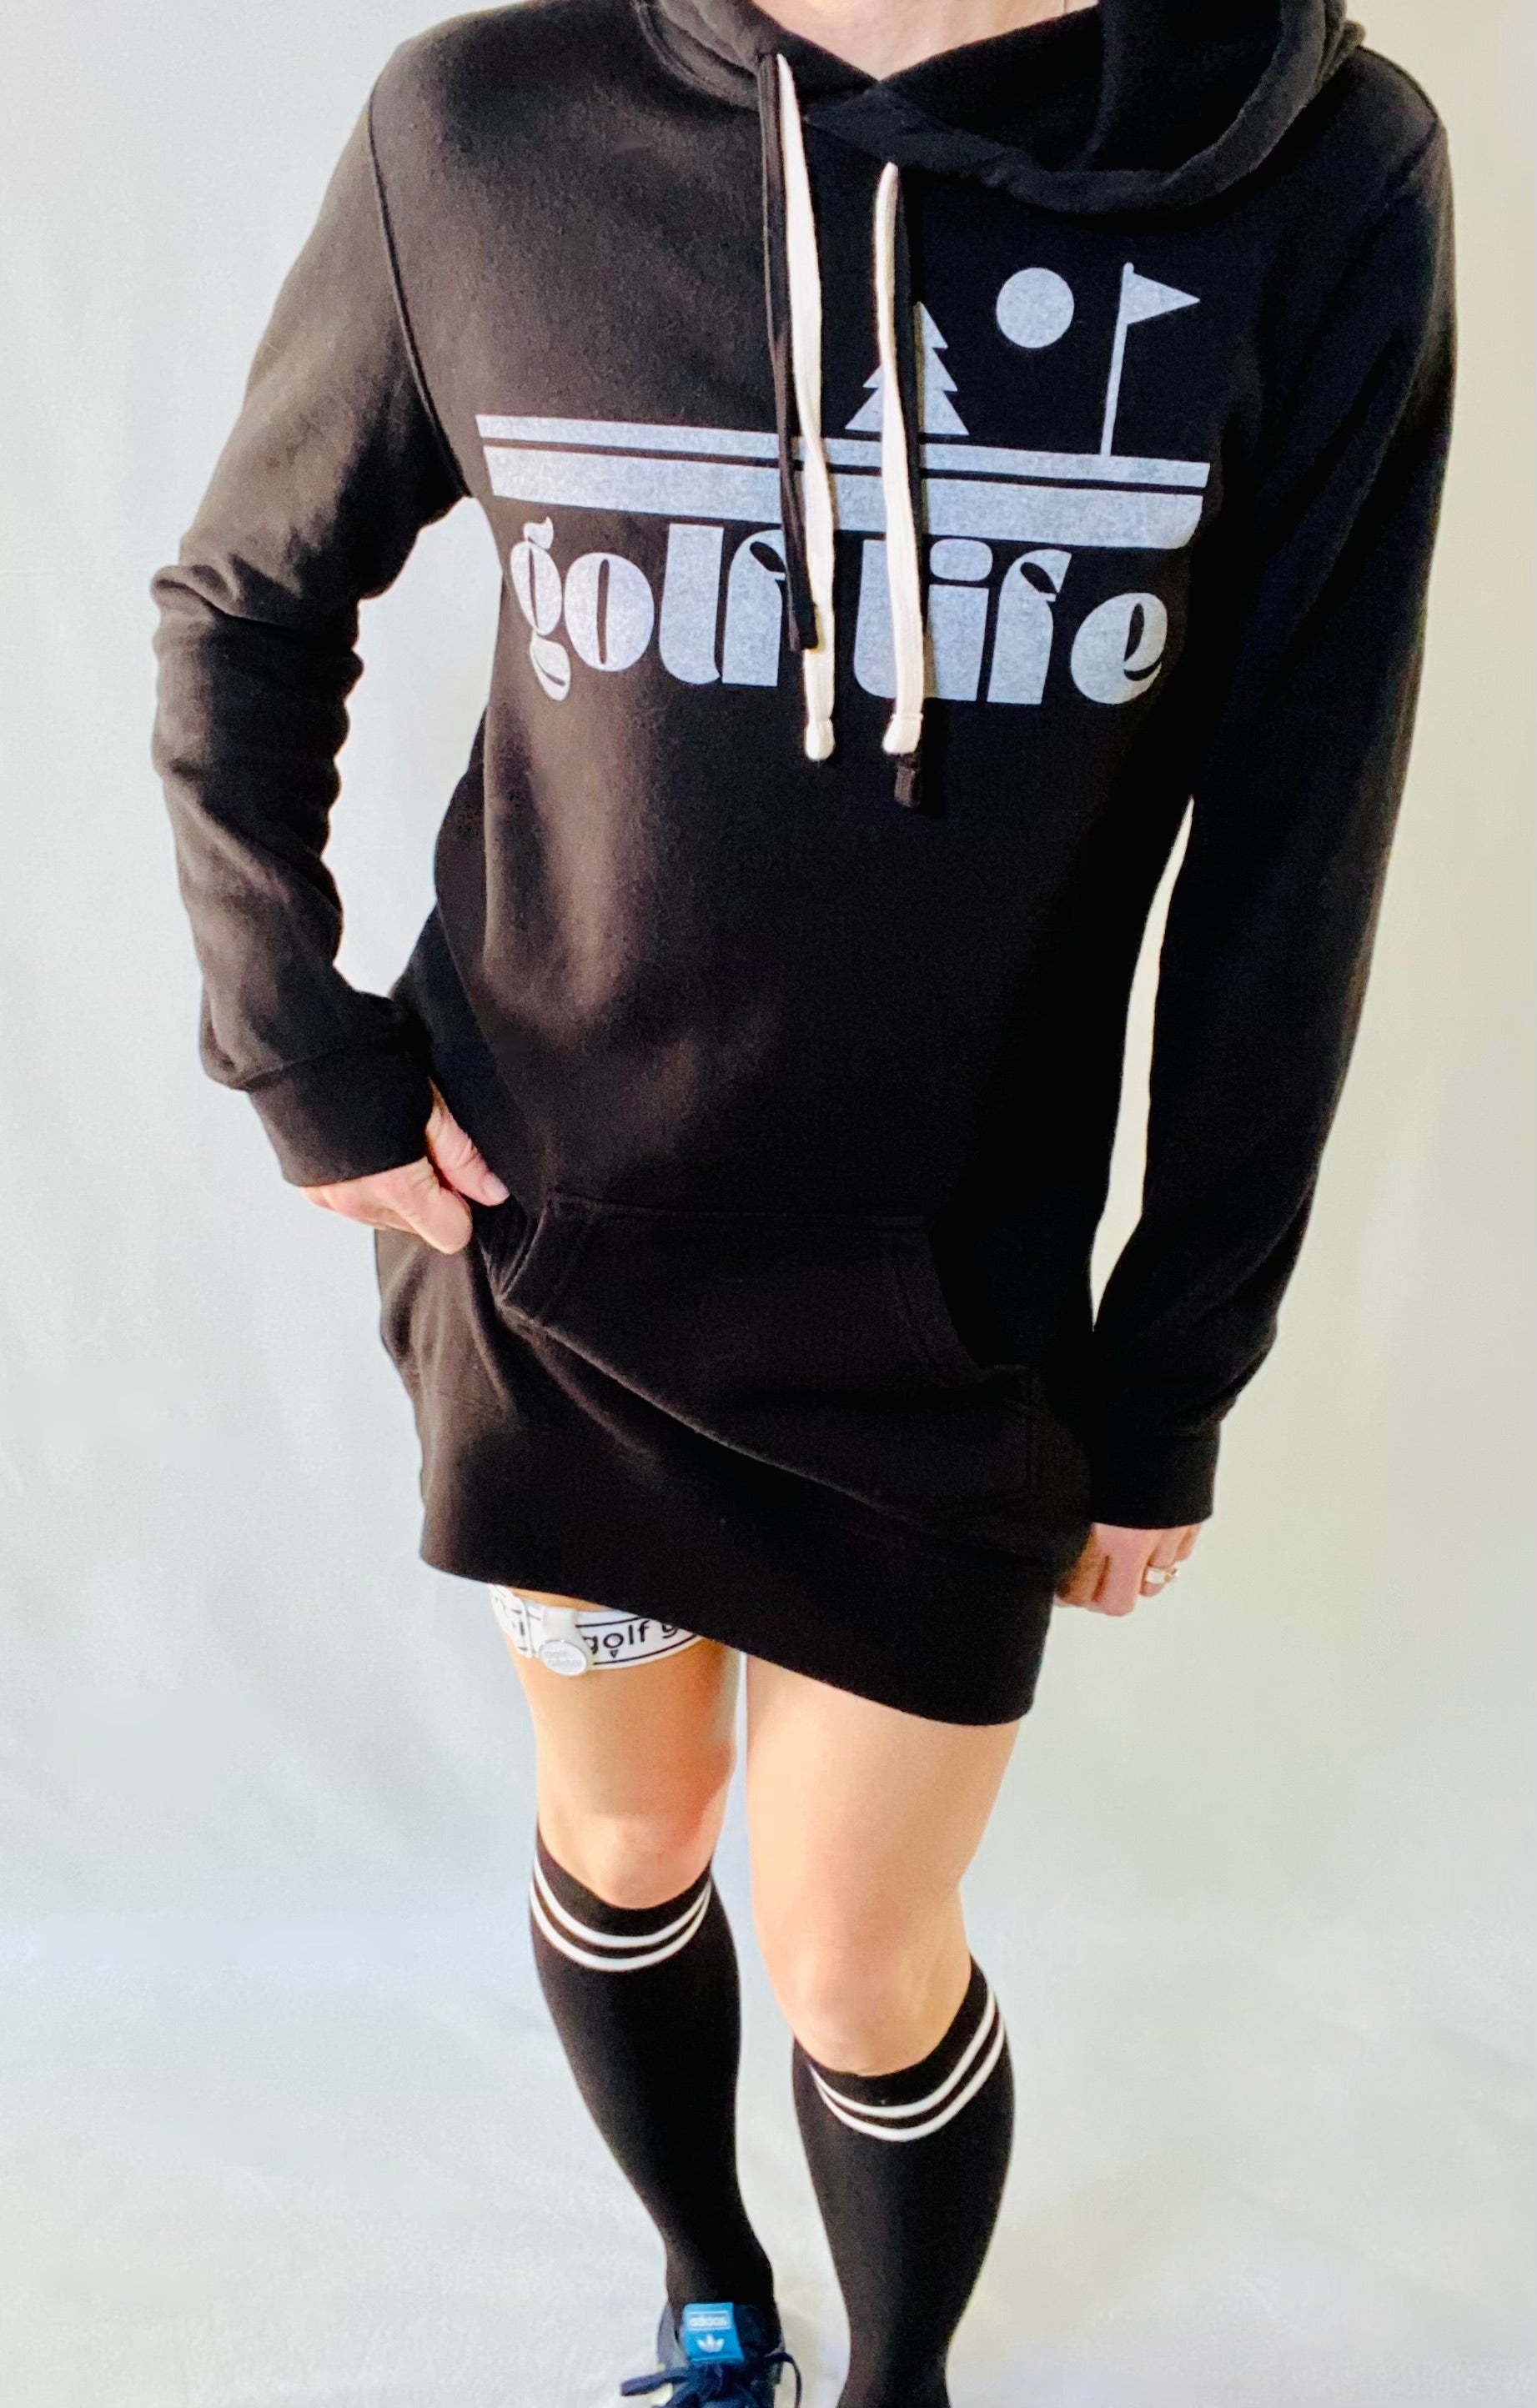  This is a photograph of a woman wearing a black hooded sweatshirt dress. She is wearing black knee-high socks with white stripes. The sweatshirt features a bold design that says golf life. She's lifting her dress a tiny bit to reveal a Golf Garter on her thigh.